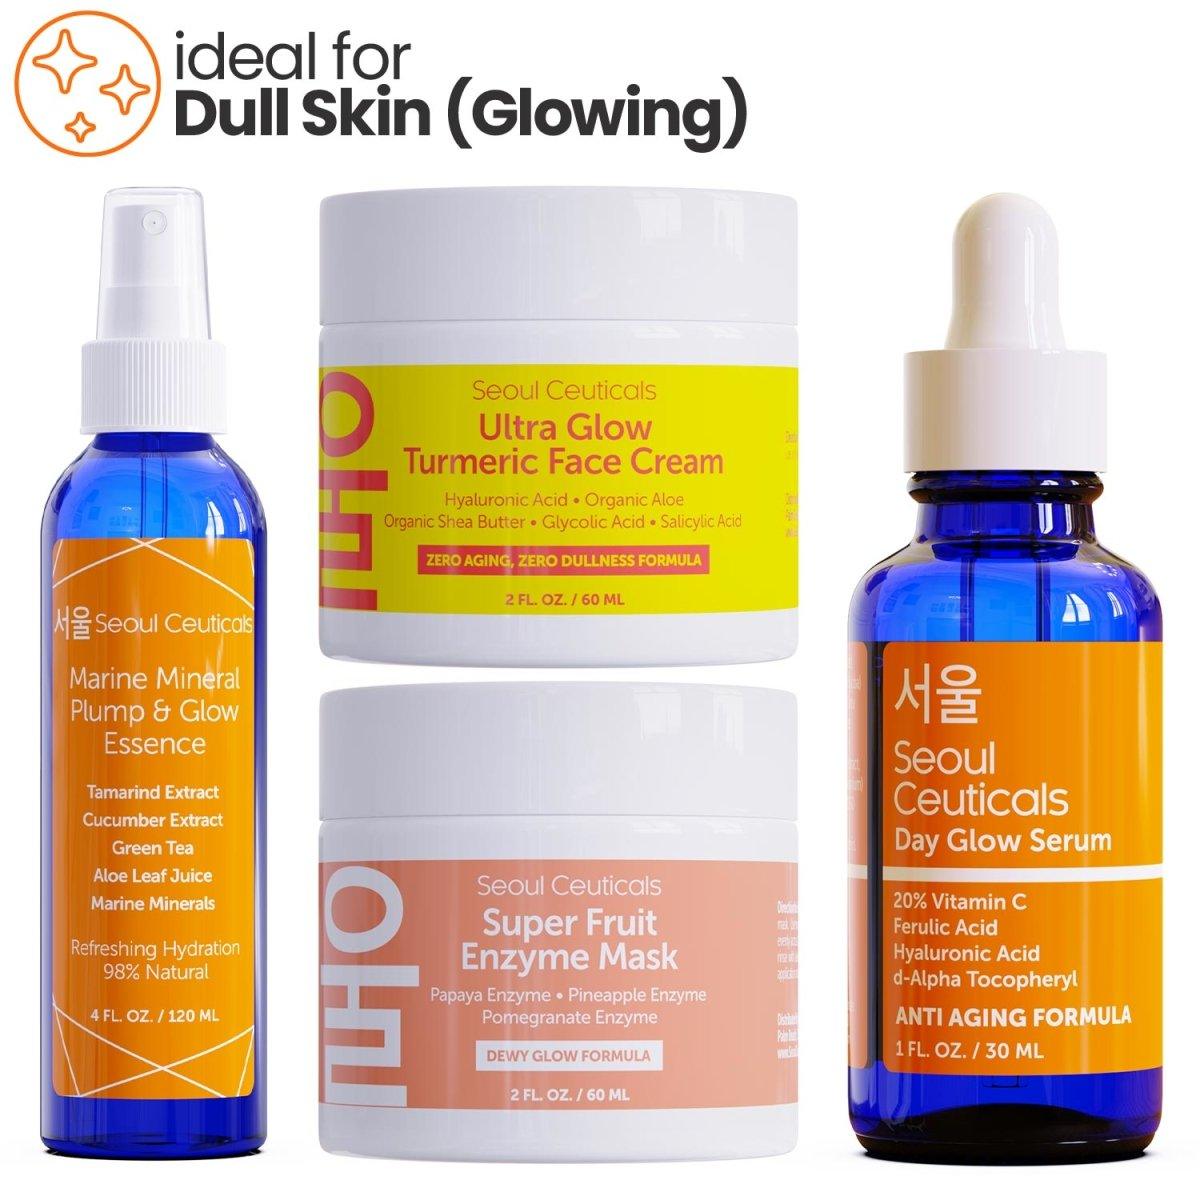 K Beauty Routine for Glowing Skin - SeoulCeuticals